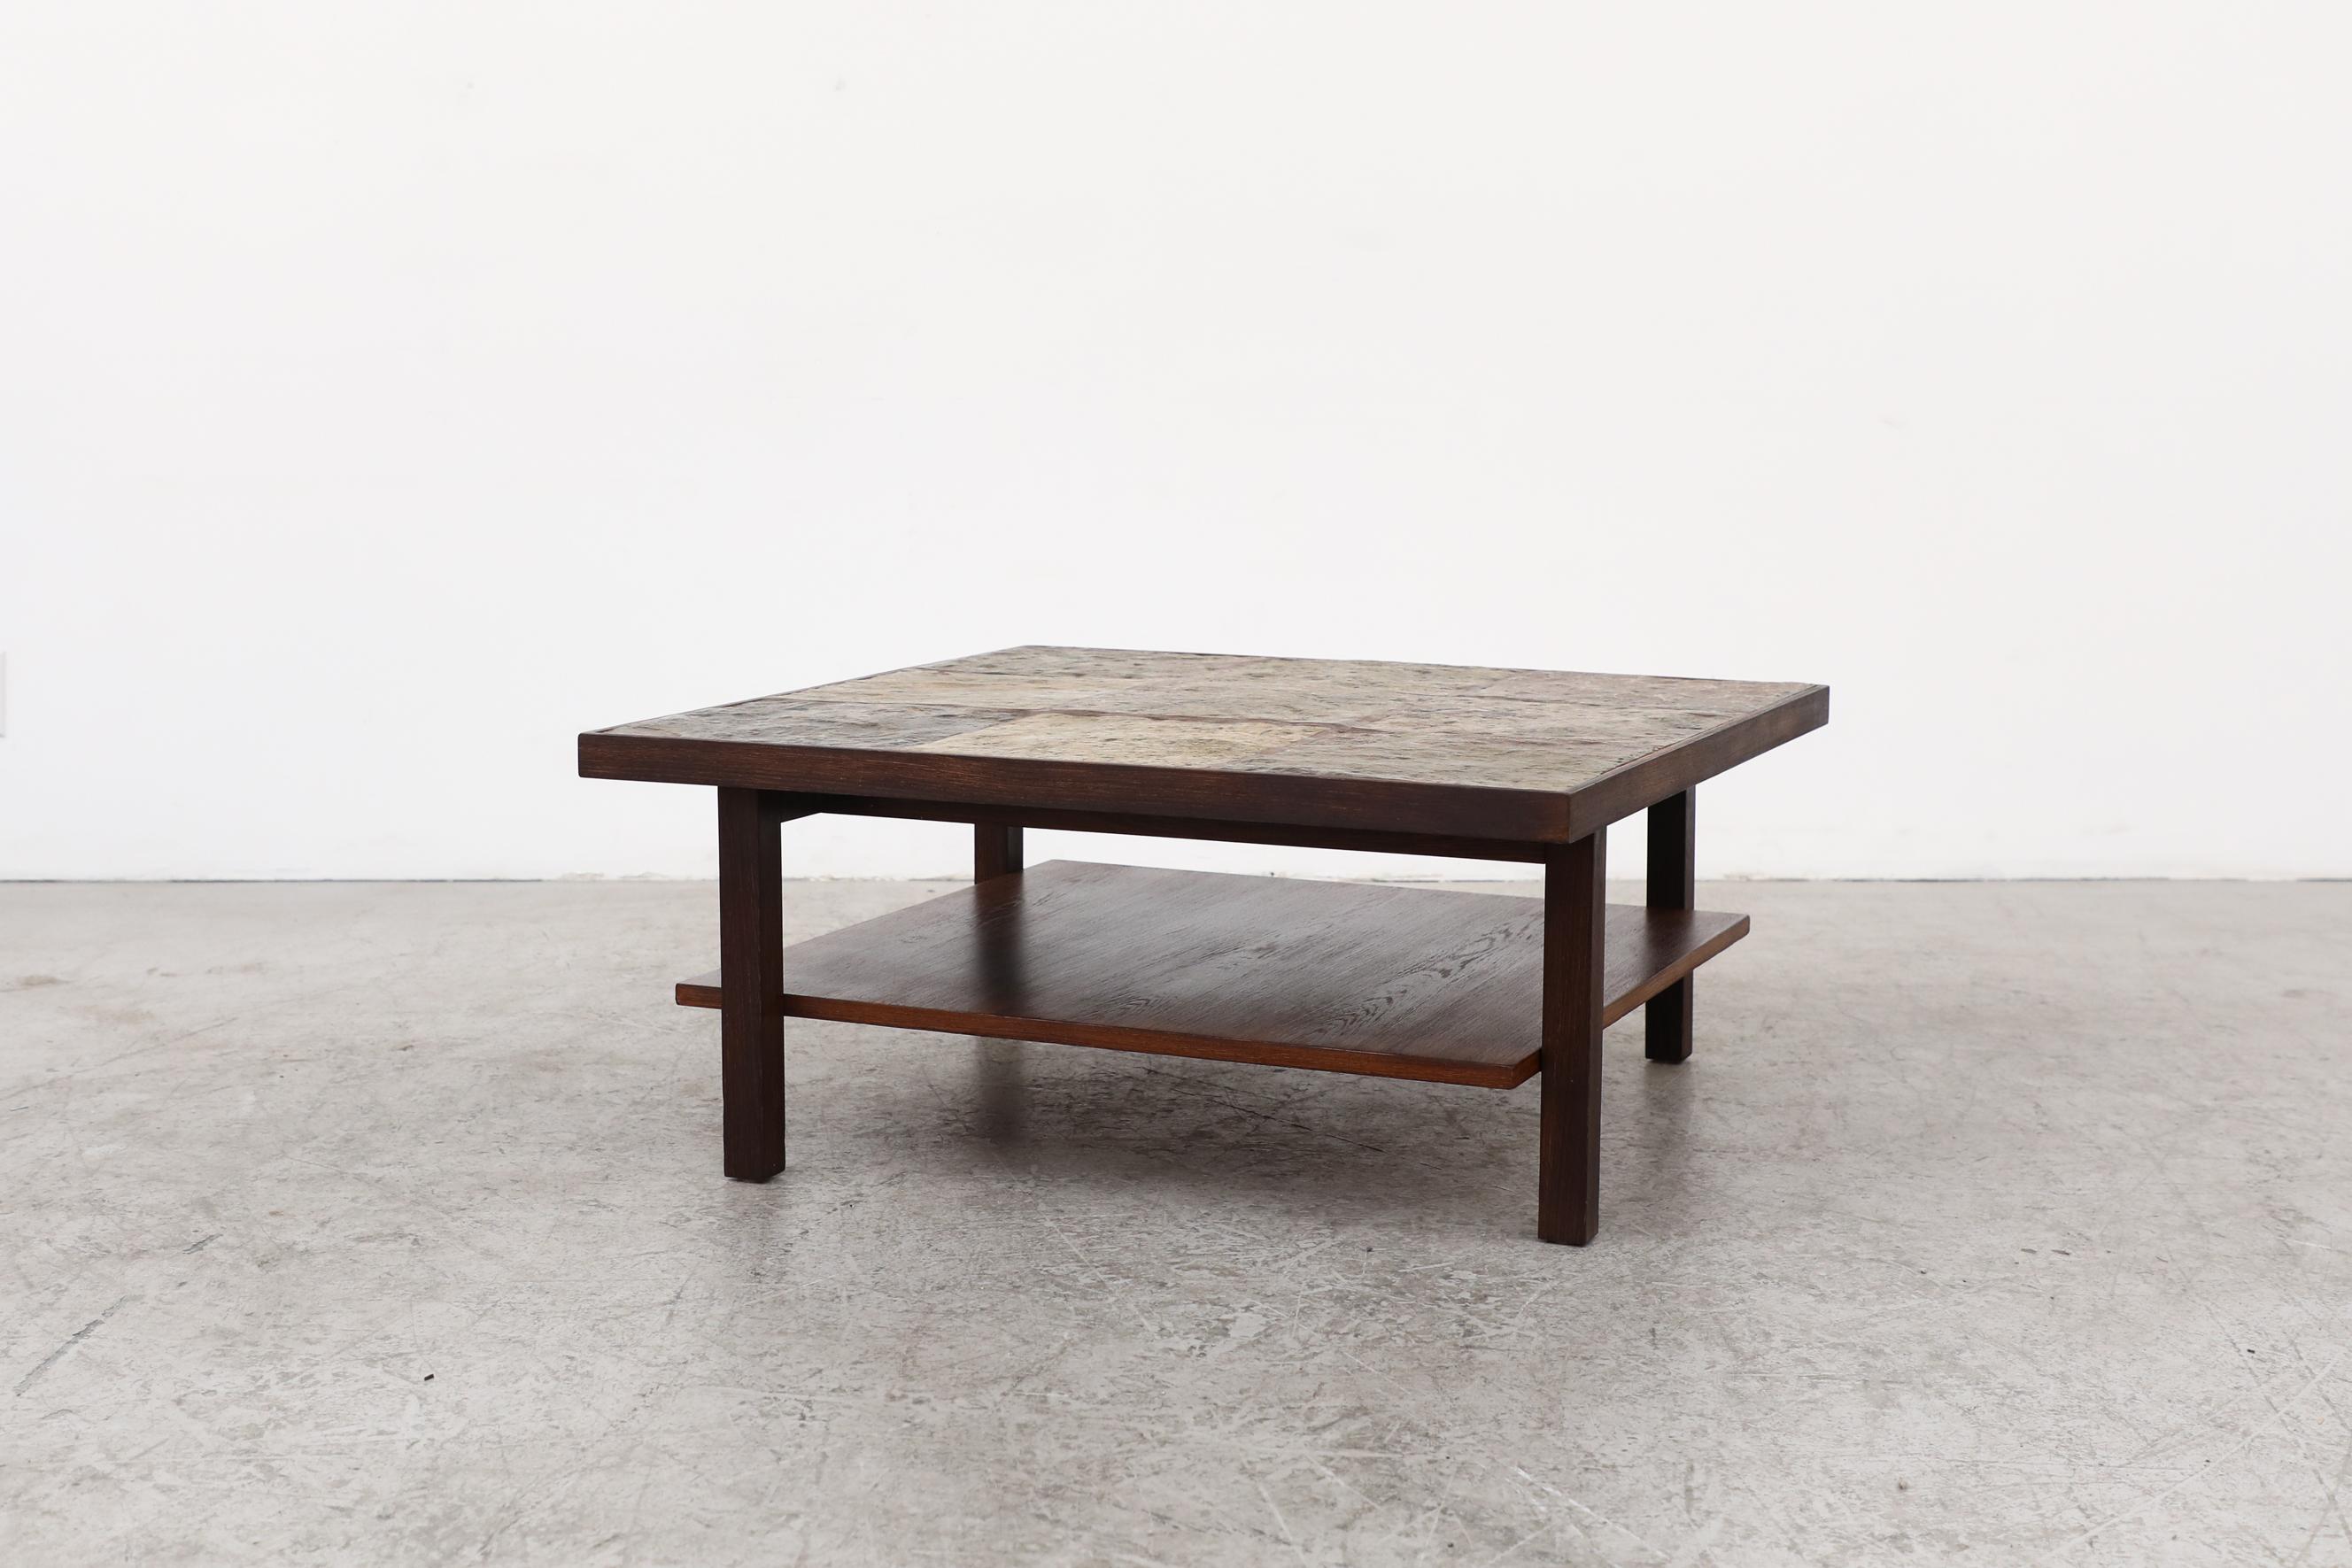 20th Century Mid-Century Modern Brutalist Wood Framed Stone Topped Coffee Table with Shelf For Sale